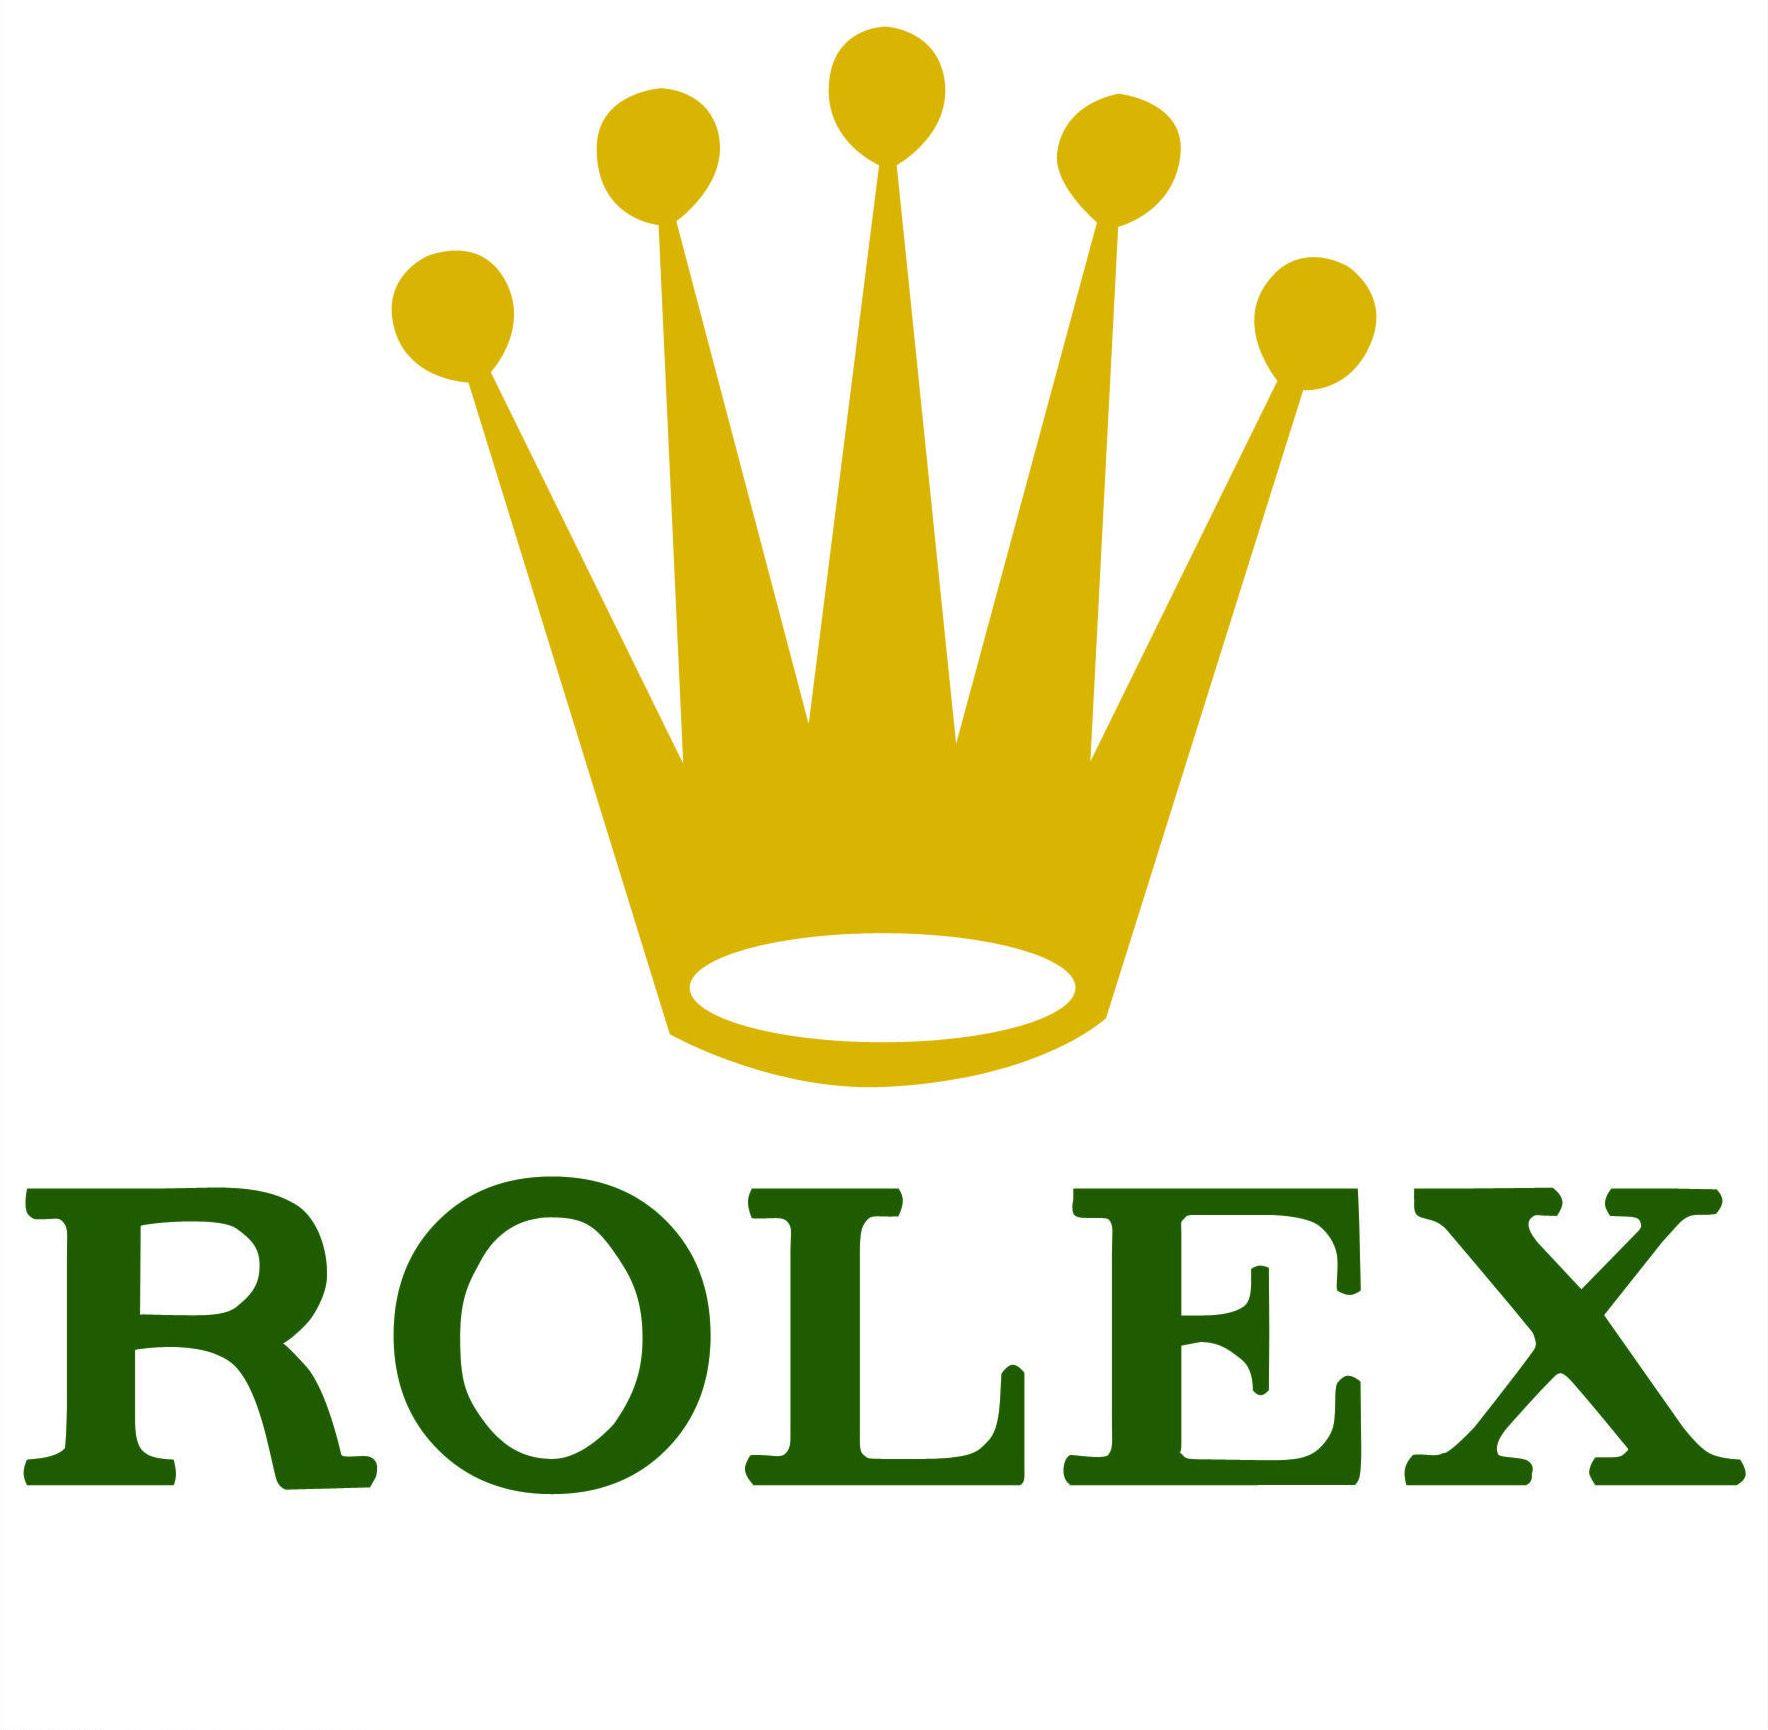 Well Known Crown Logo - Logo 8- Rolex It gives a sense of royalty, which is what the watch